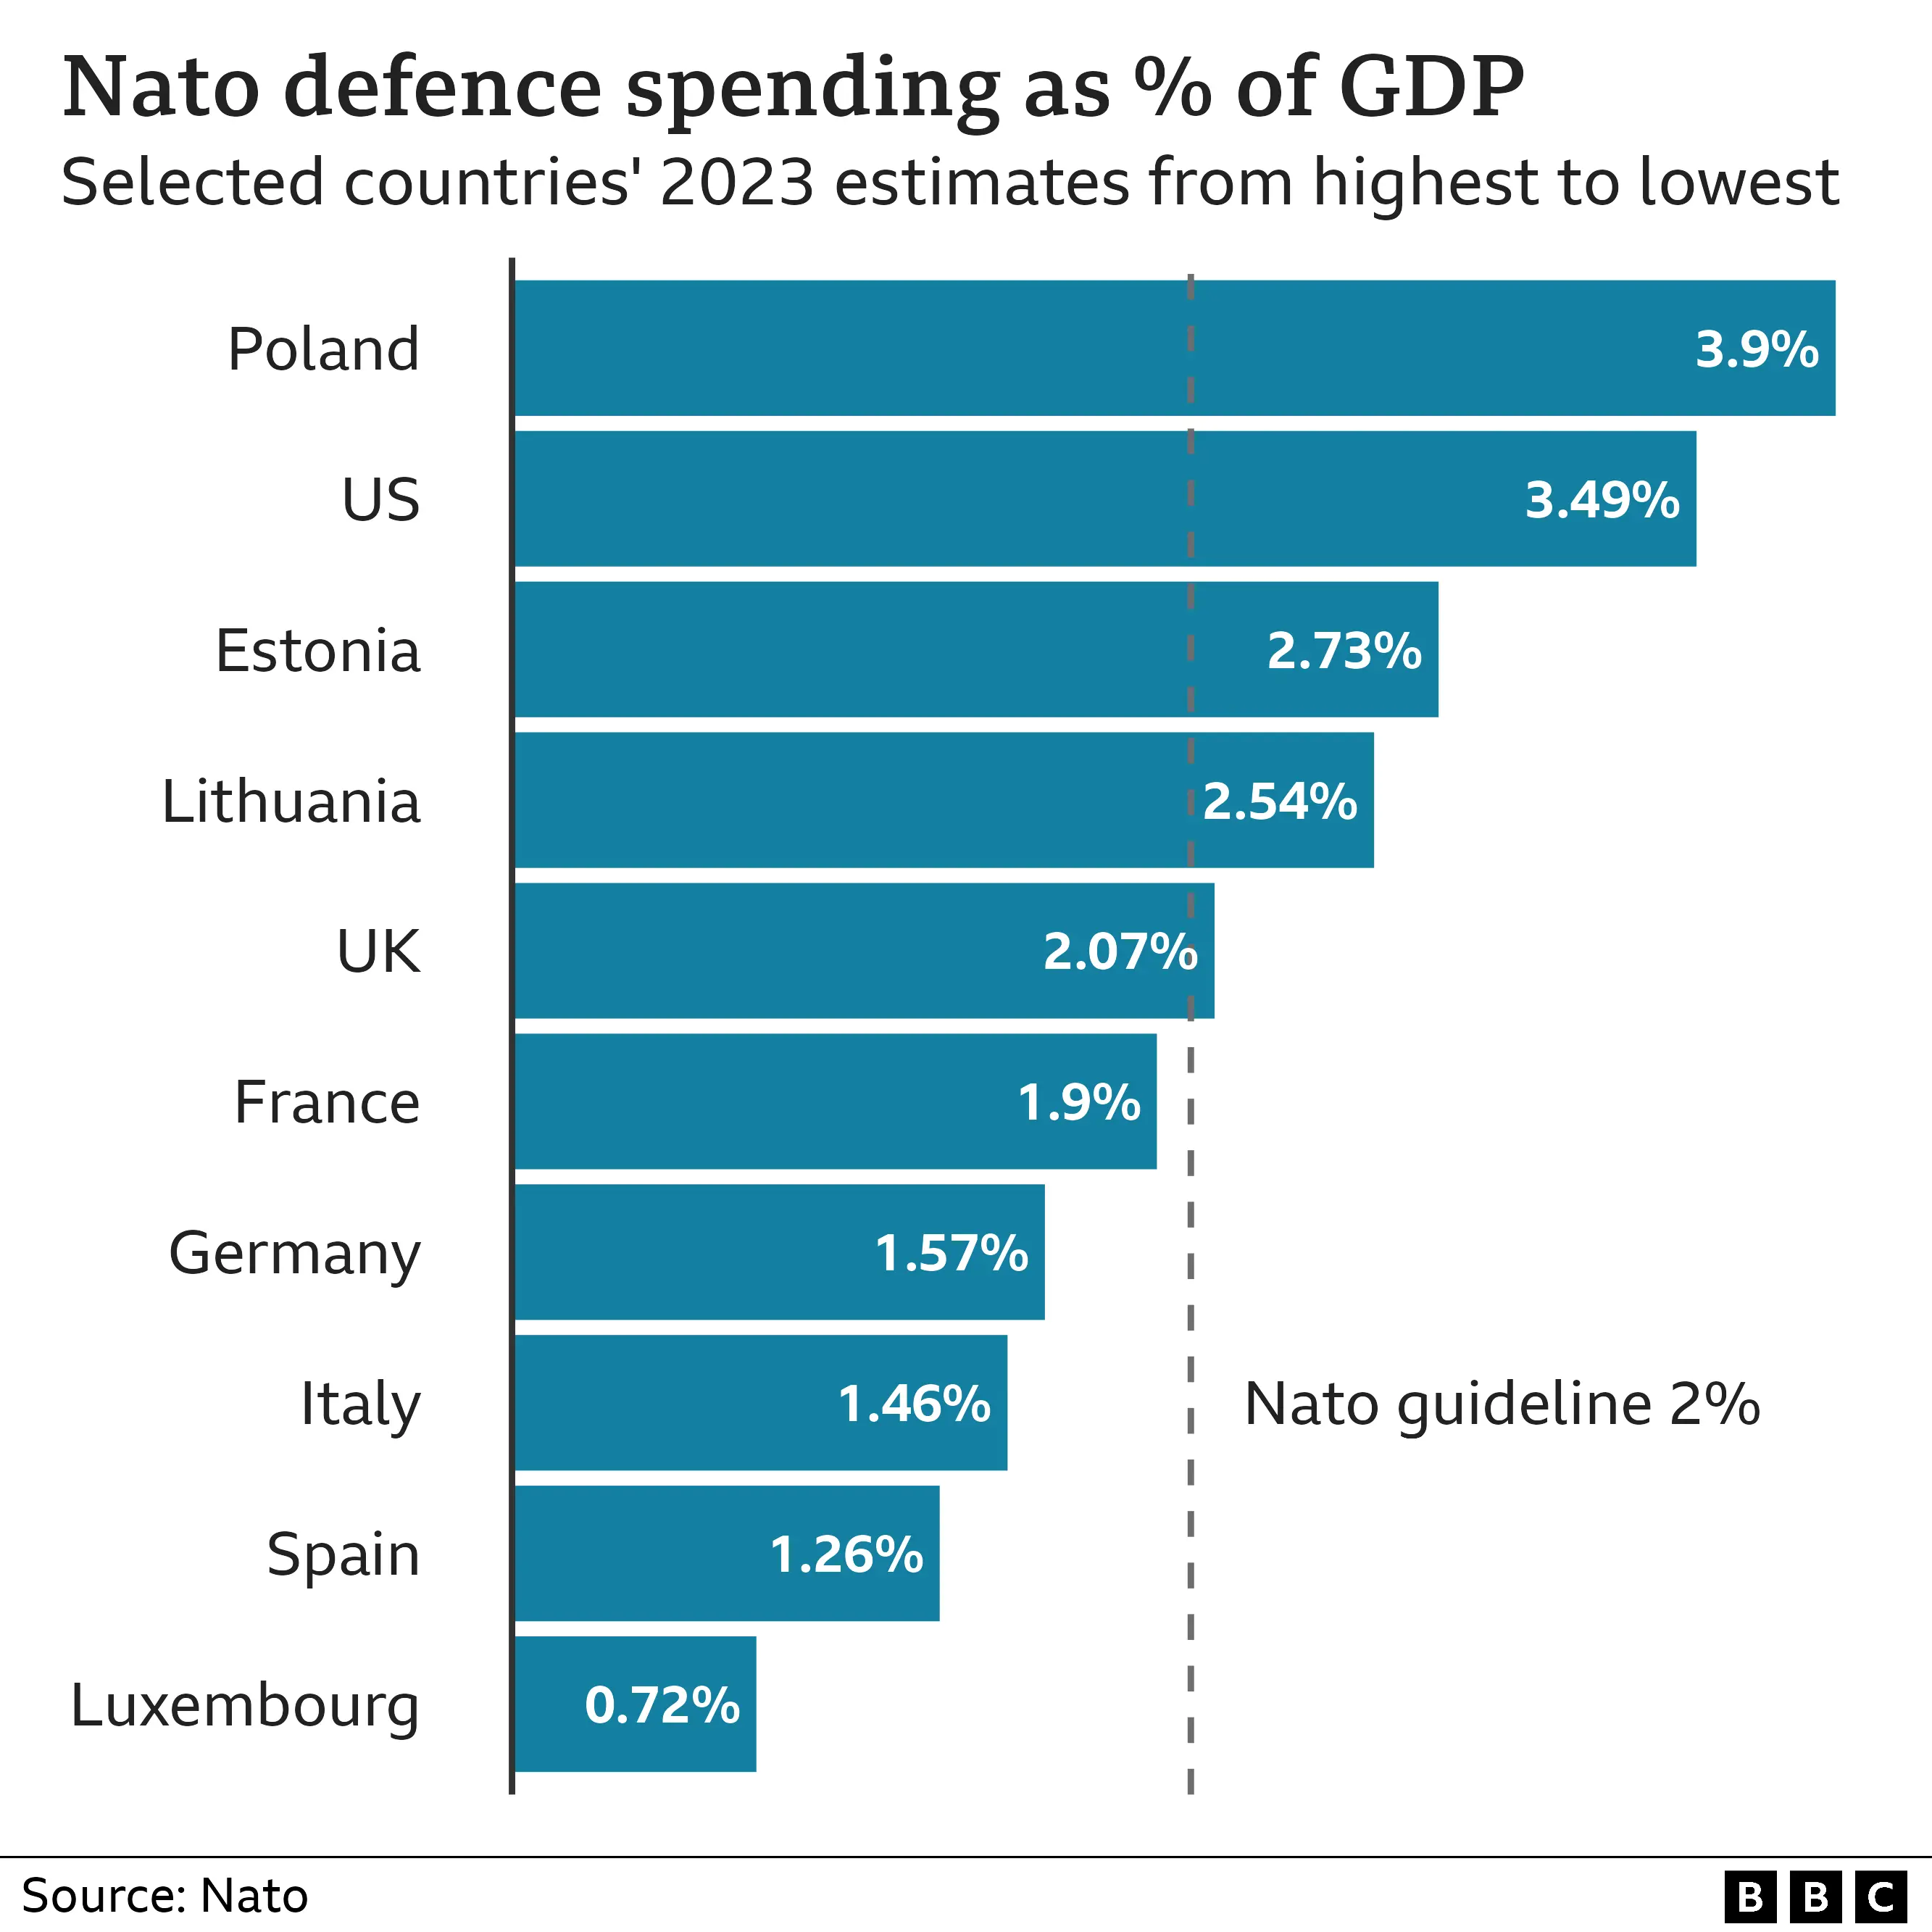 Graphic showing Nato defence spending as a % of GDP (added July 2023) qhidqhiquqiqqhinv